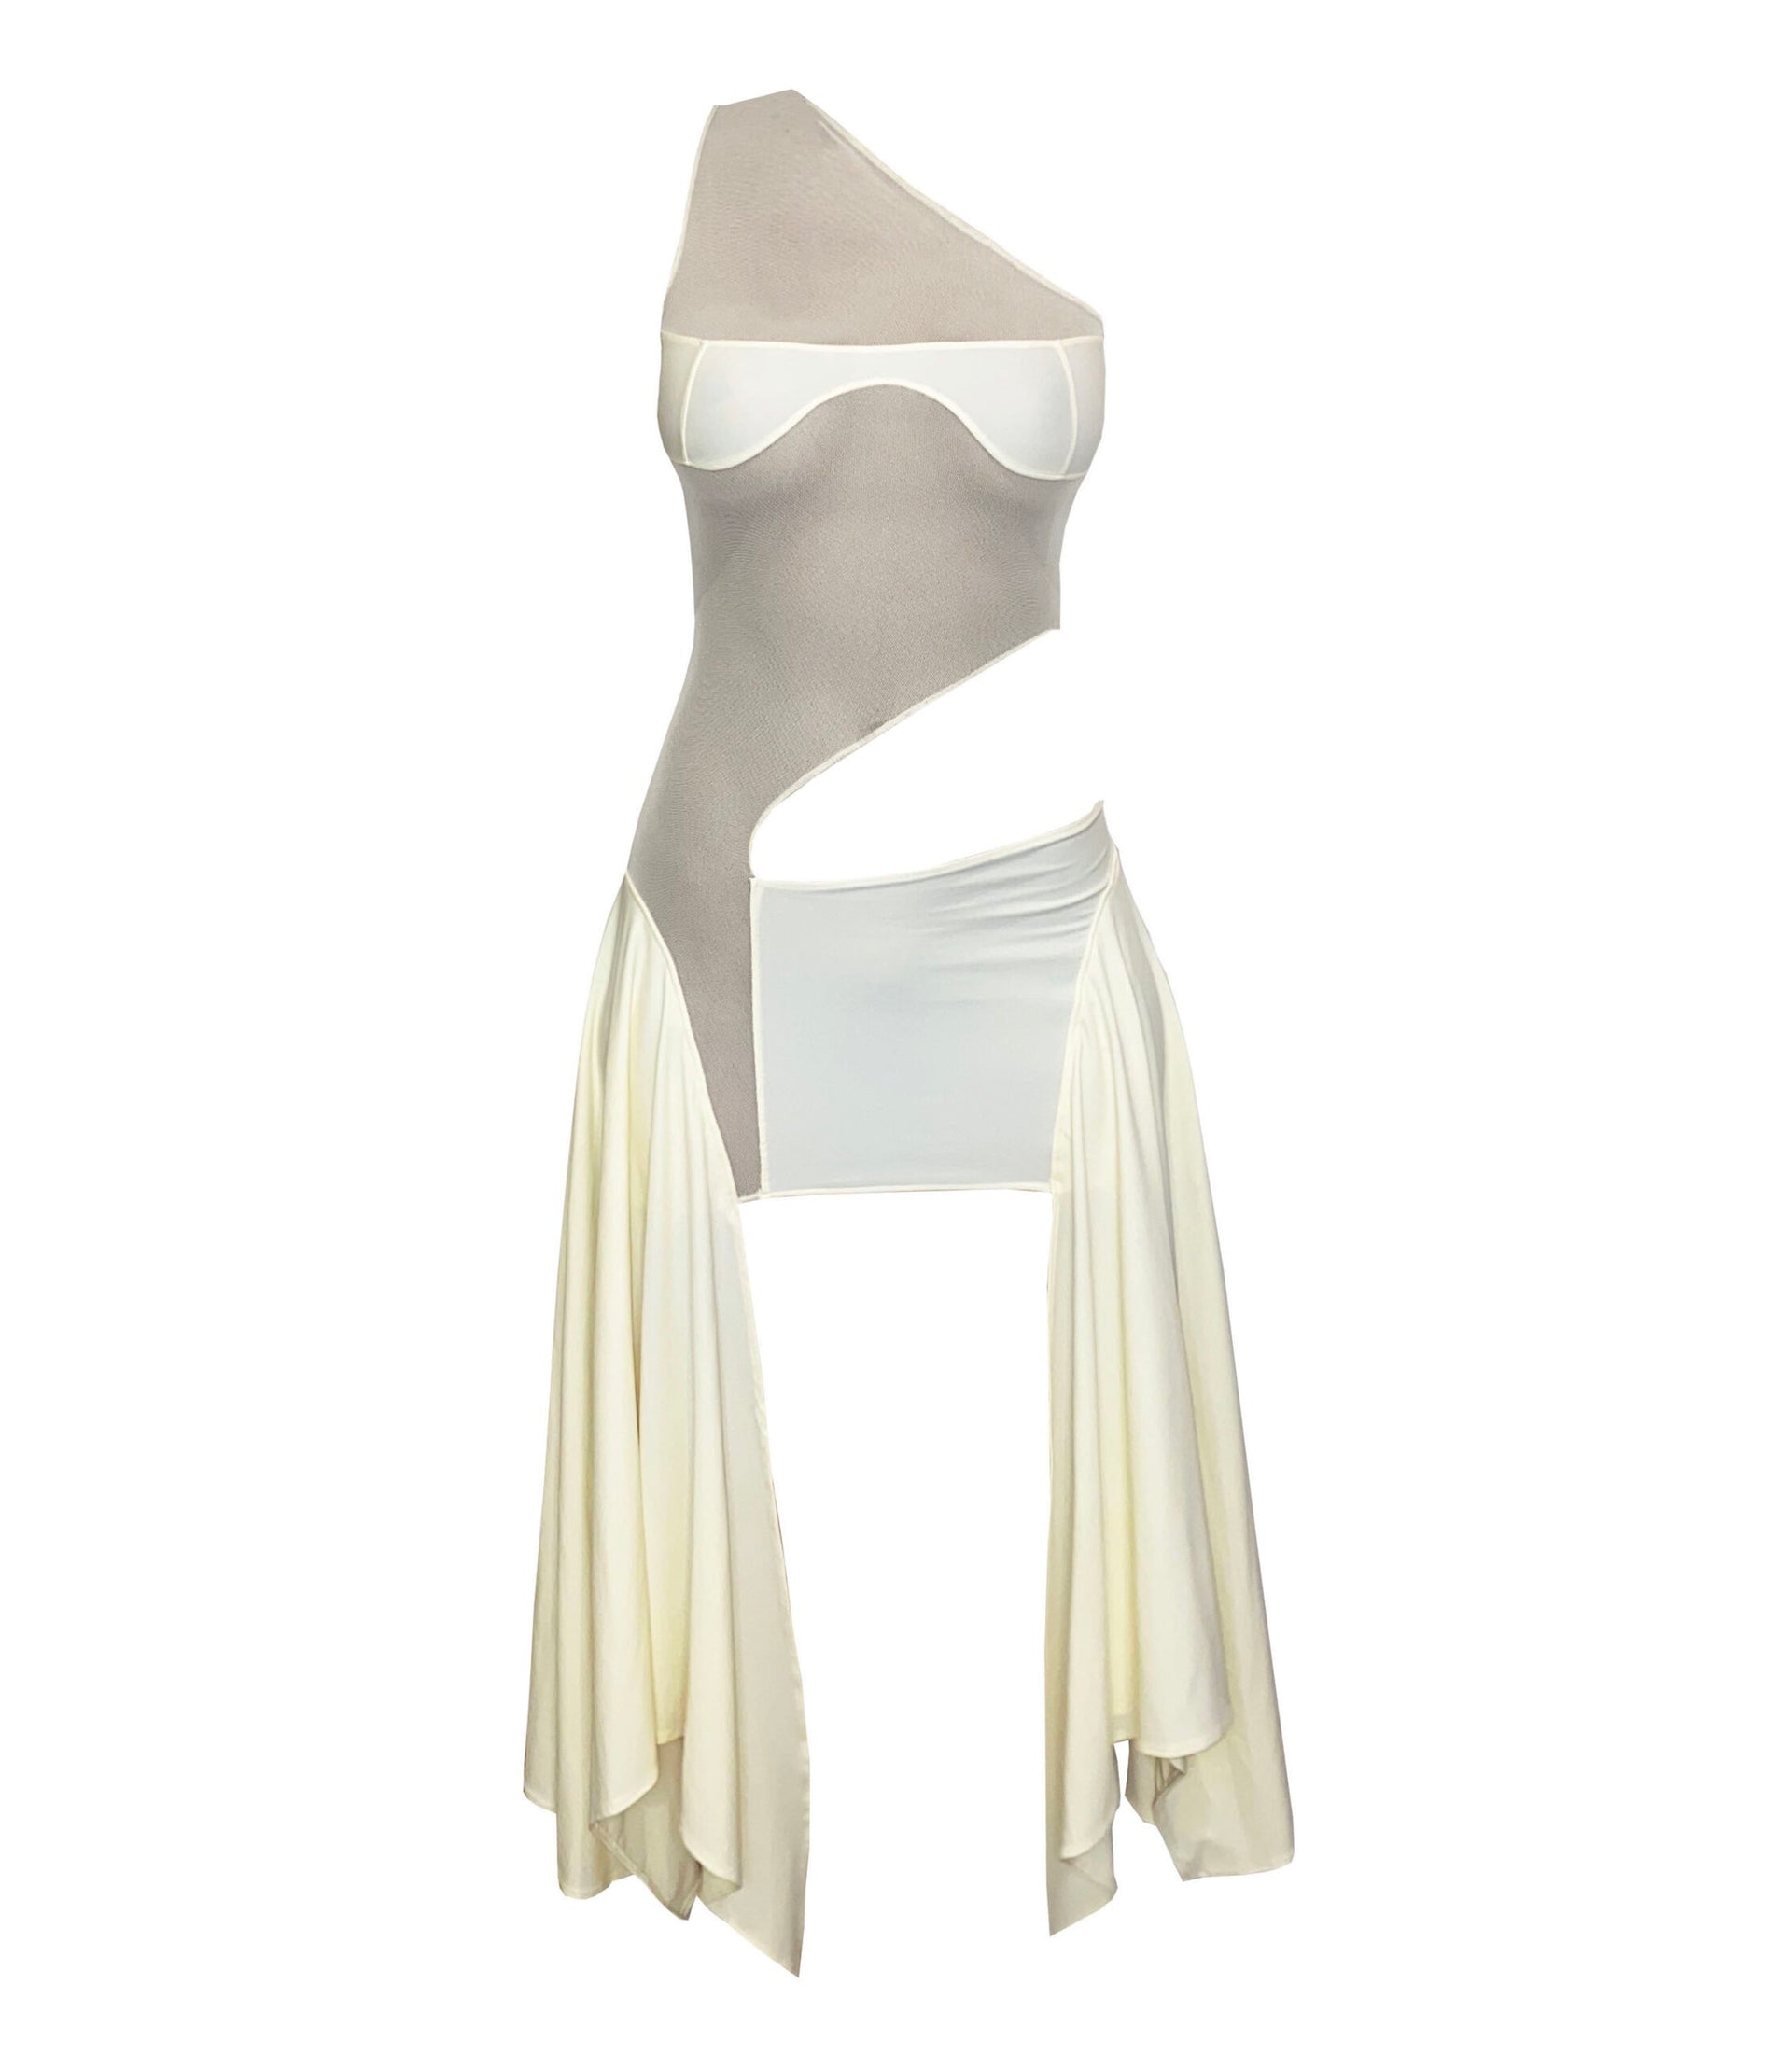 Sketch-y - Mesh Cut Out dress in Ivory Yellow Tricot